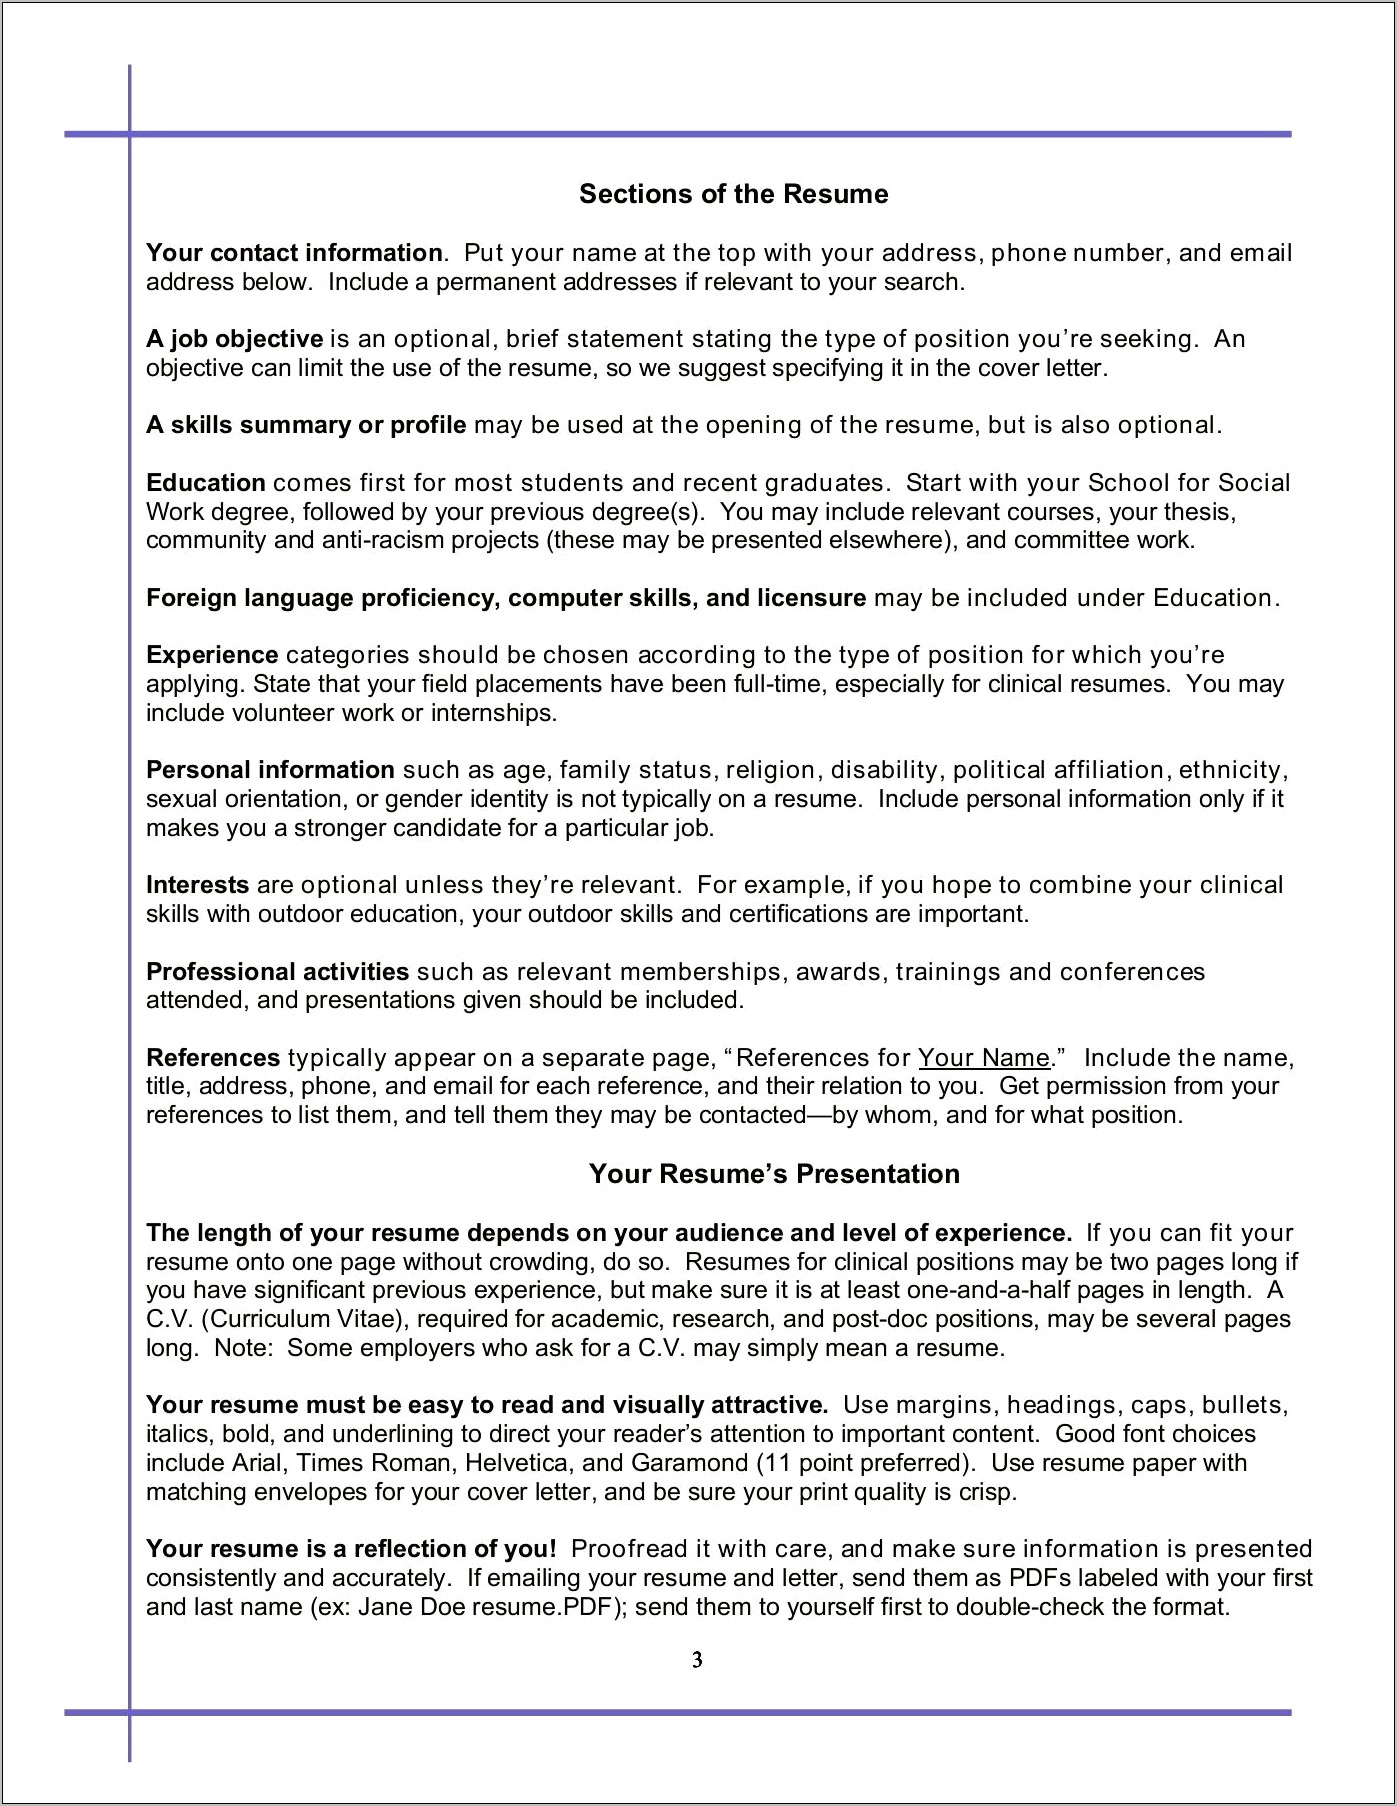 Professional Summary For Social Worker Disability Resume